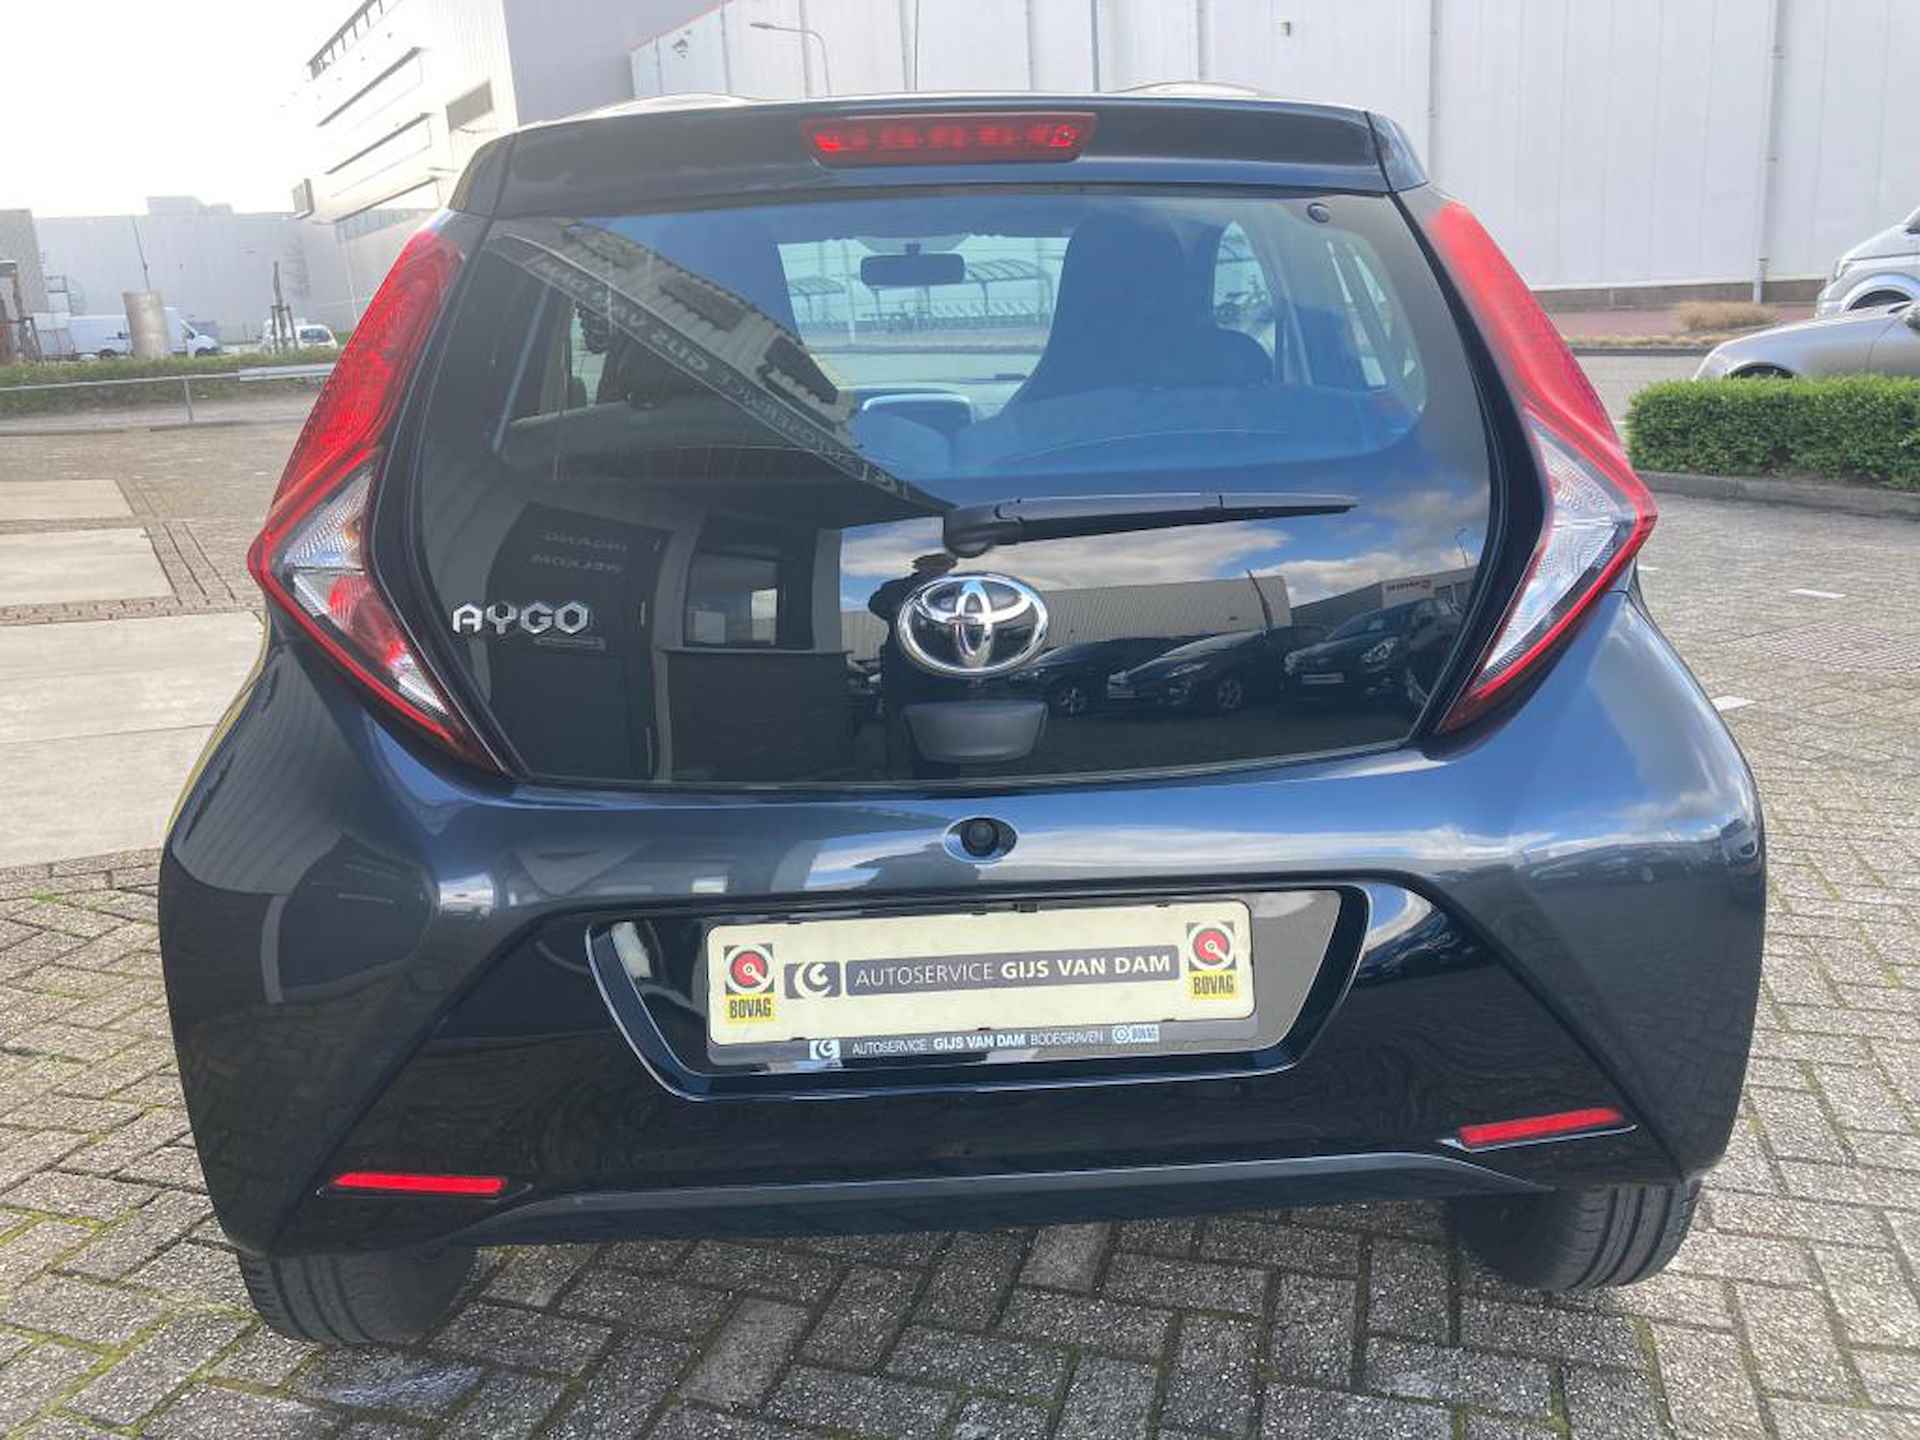 Toyota Aygo 1.0 VVT-i x-play limited "All-in" prijs! - 8/12